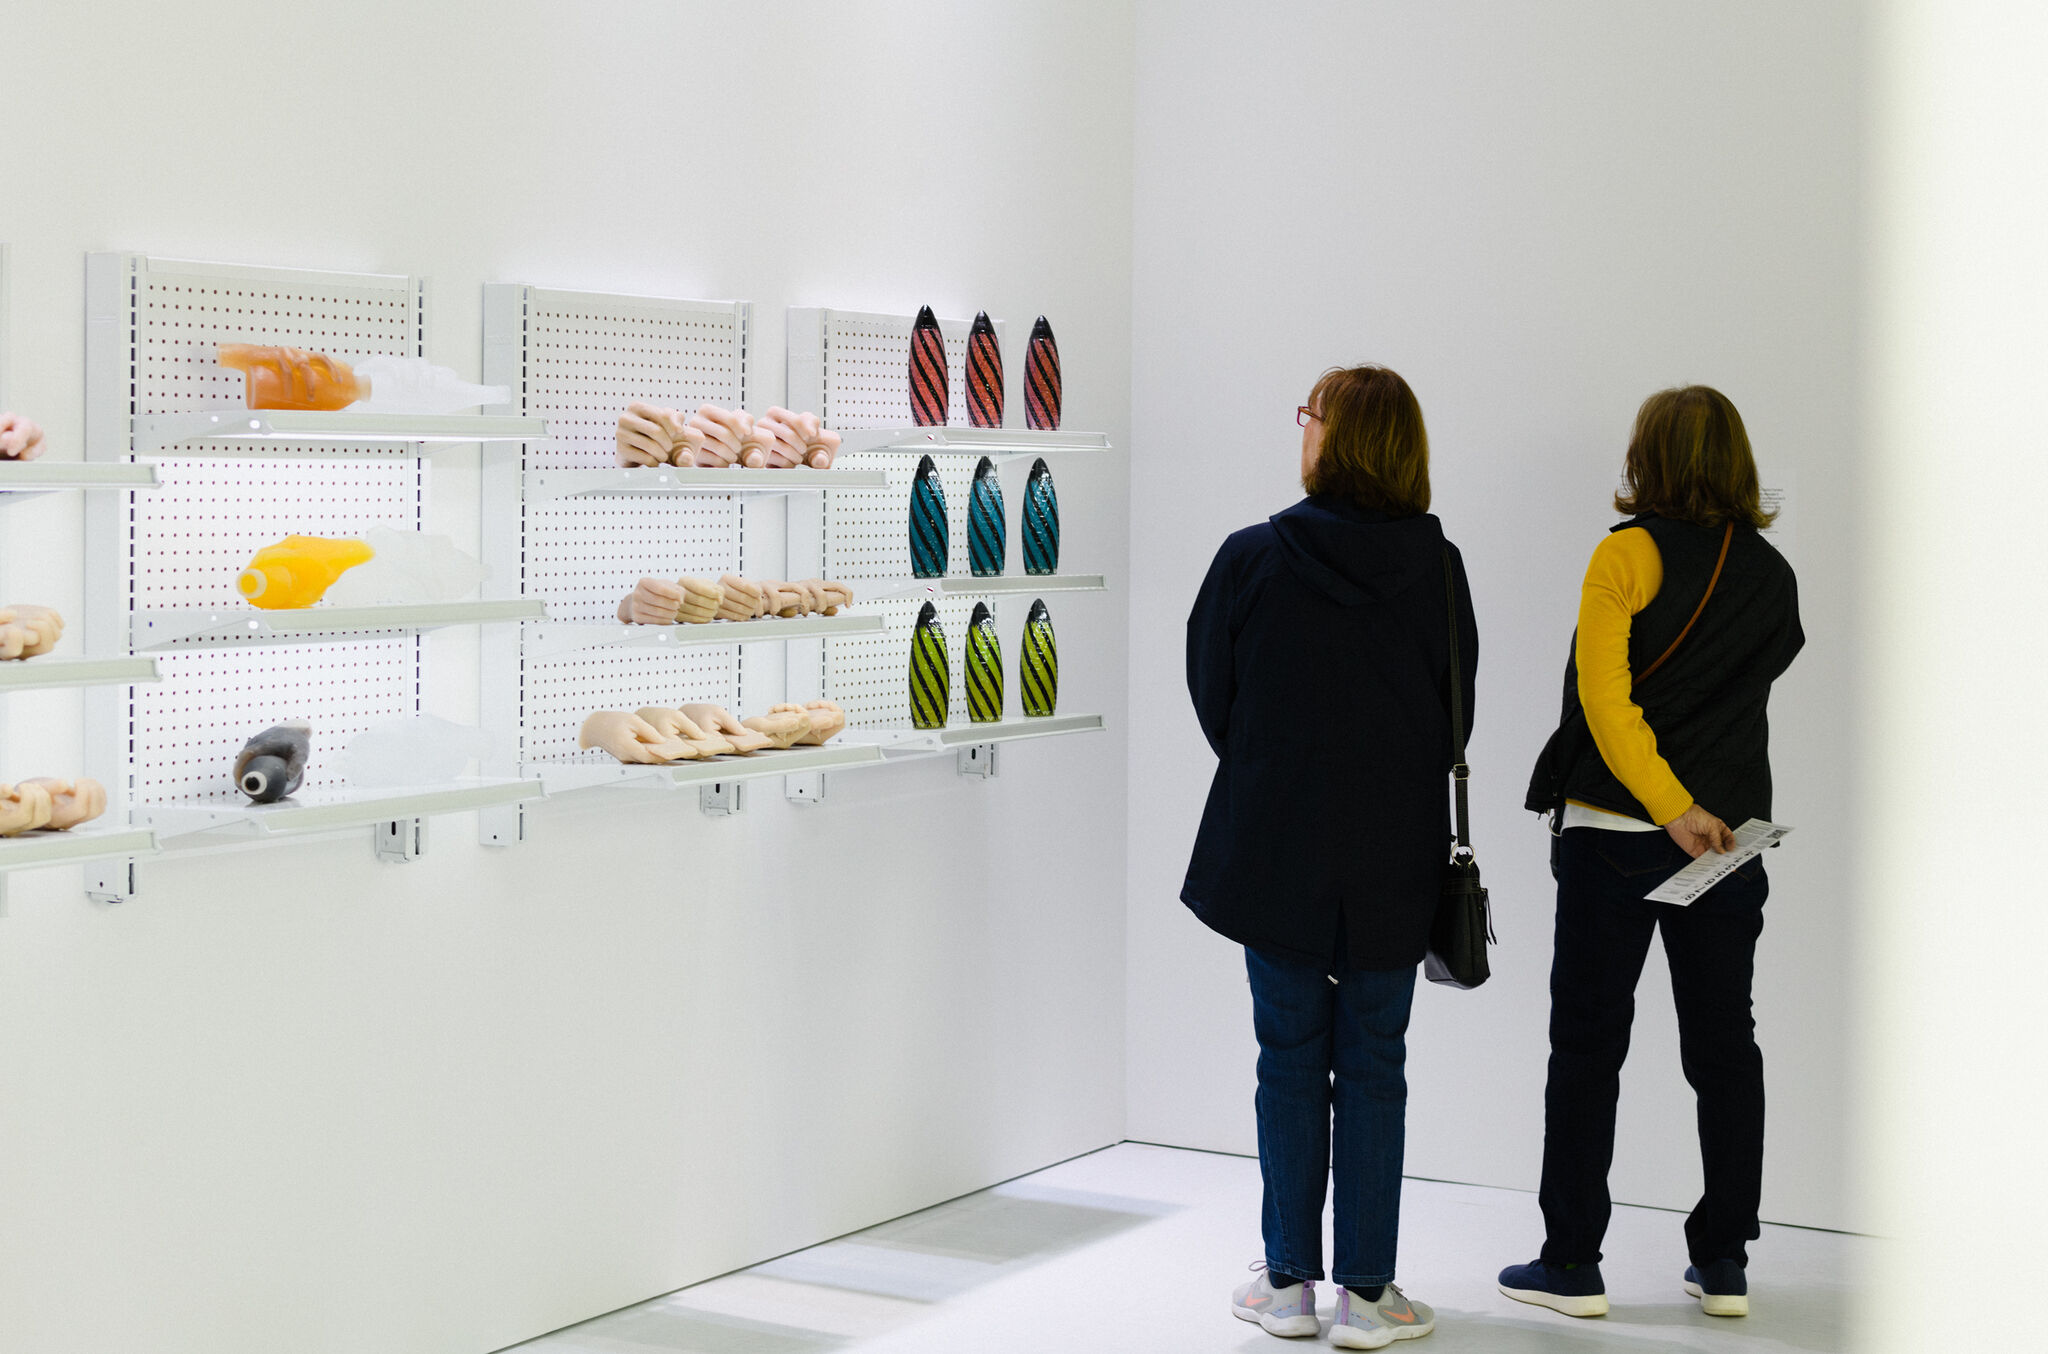 Two museum visitors stand in the corner of a gallery with industrial shelves on the wall filled with colorful sculptures, including multiple lifelike hands.